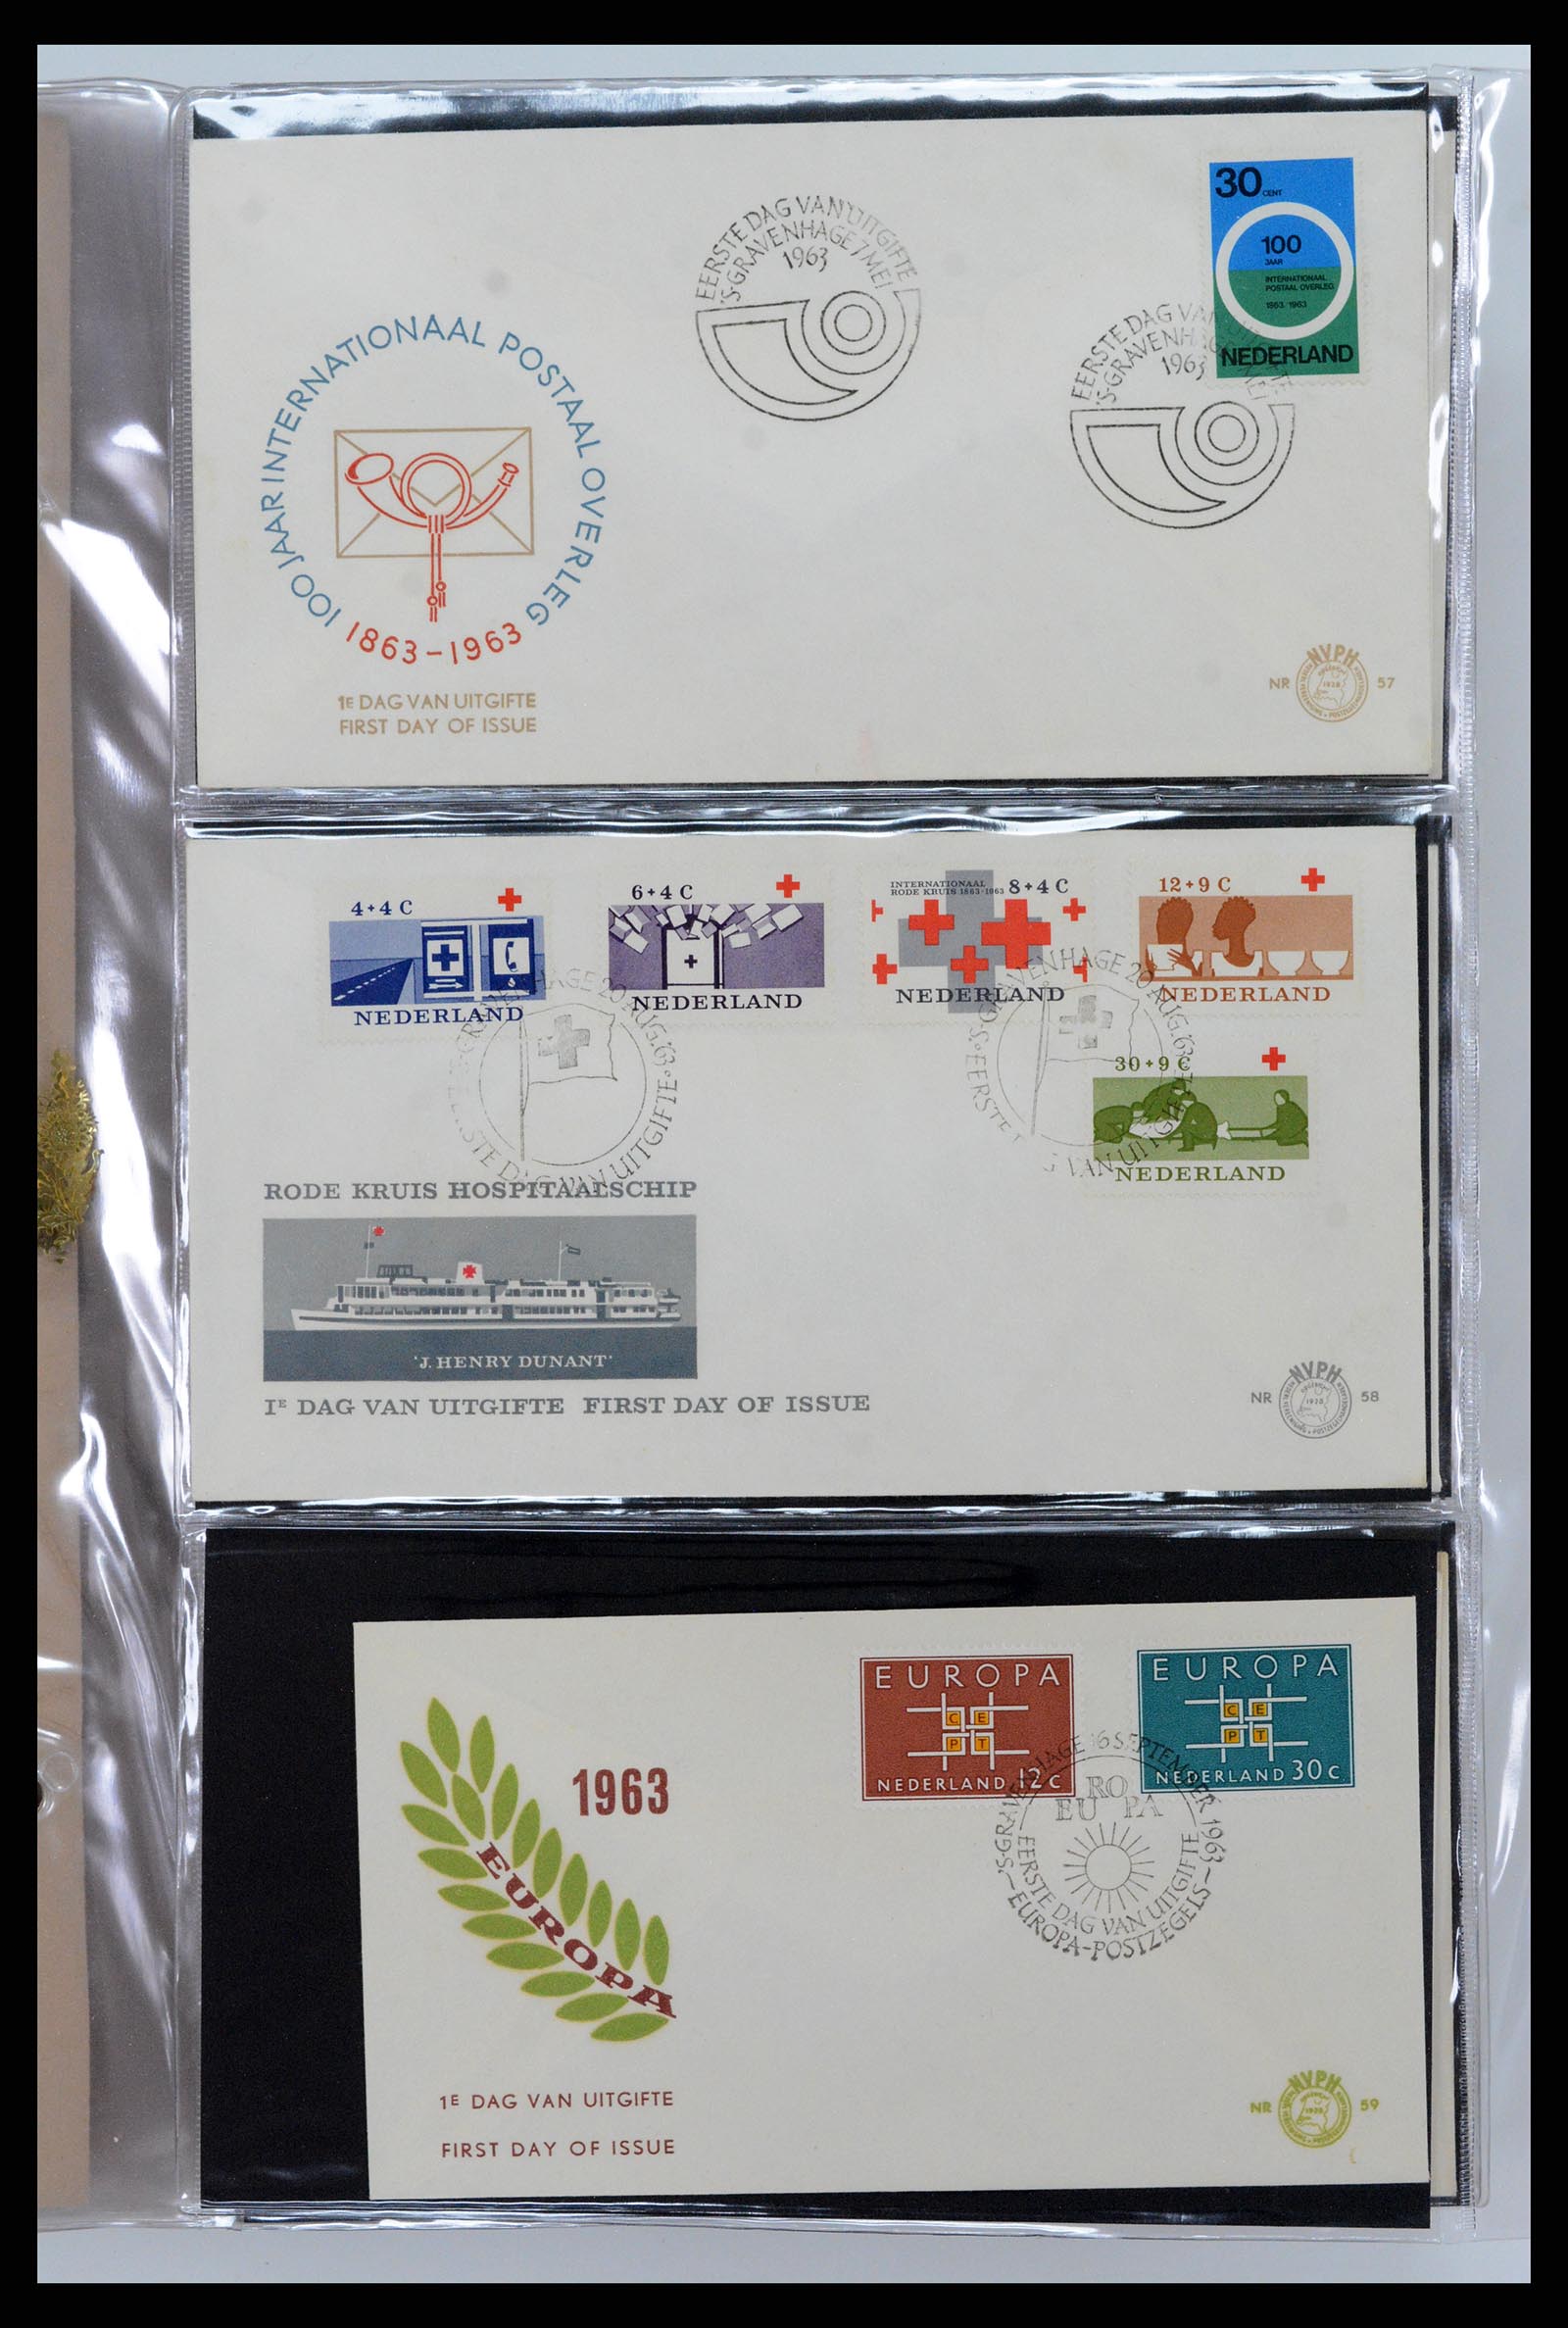 37461 020 - Stamp collection 37461 Netherlands FDC's 1950-2014.